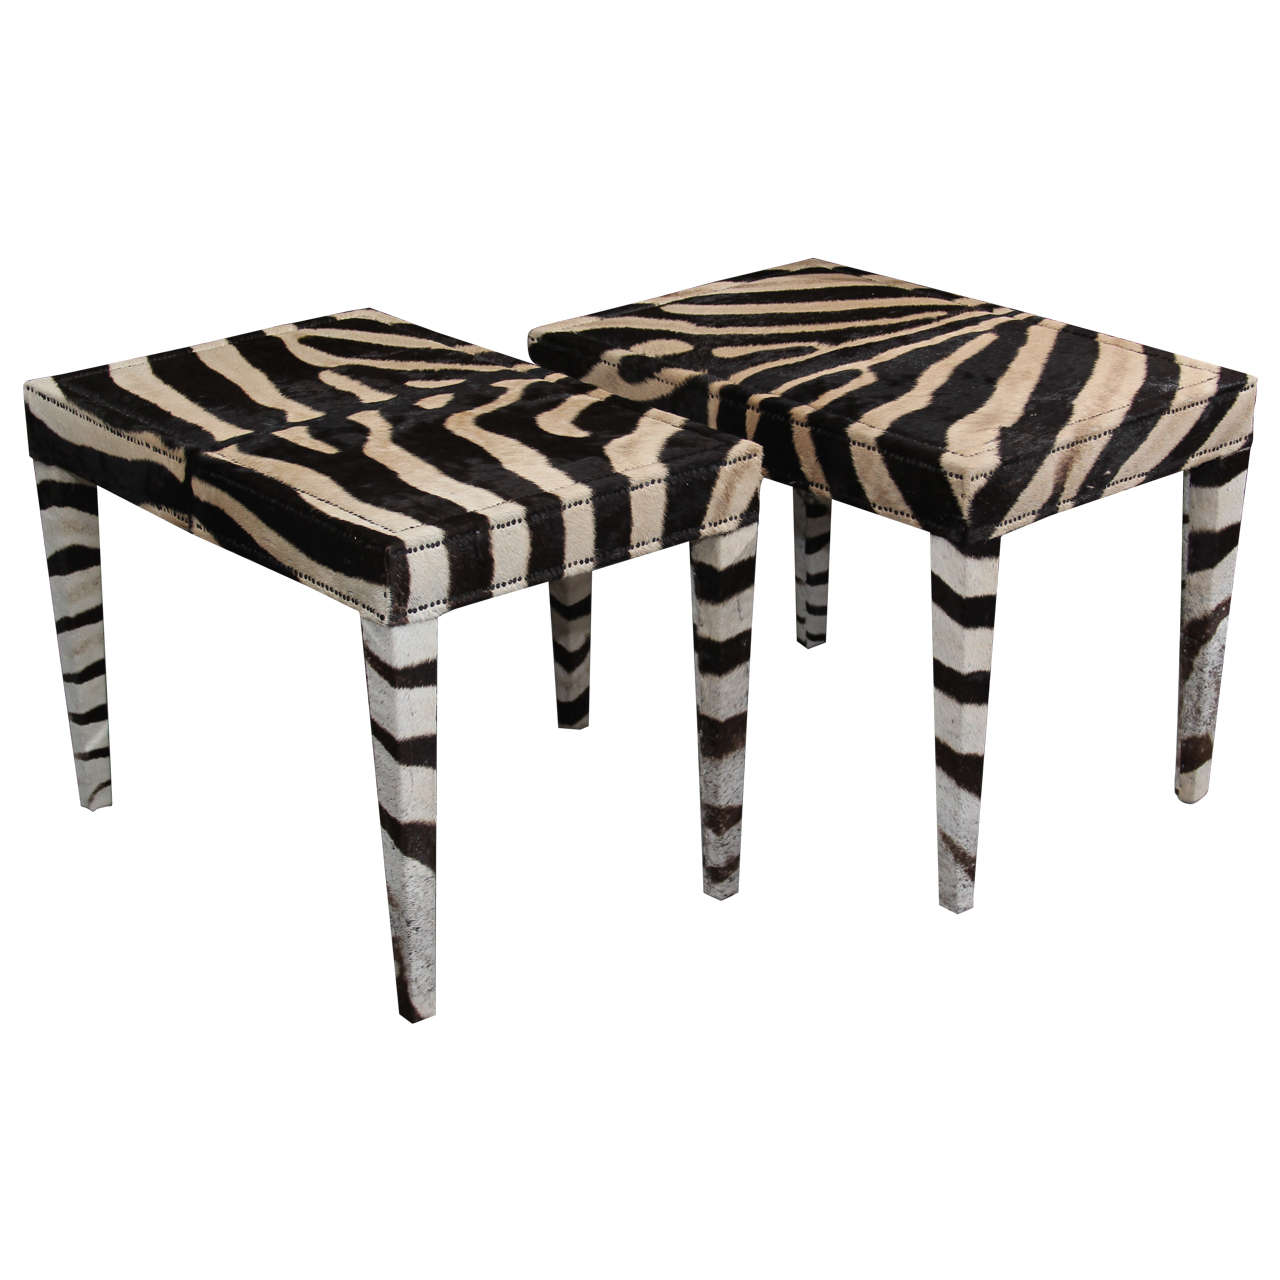 Pair of Benches in Vintage Zebra